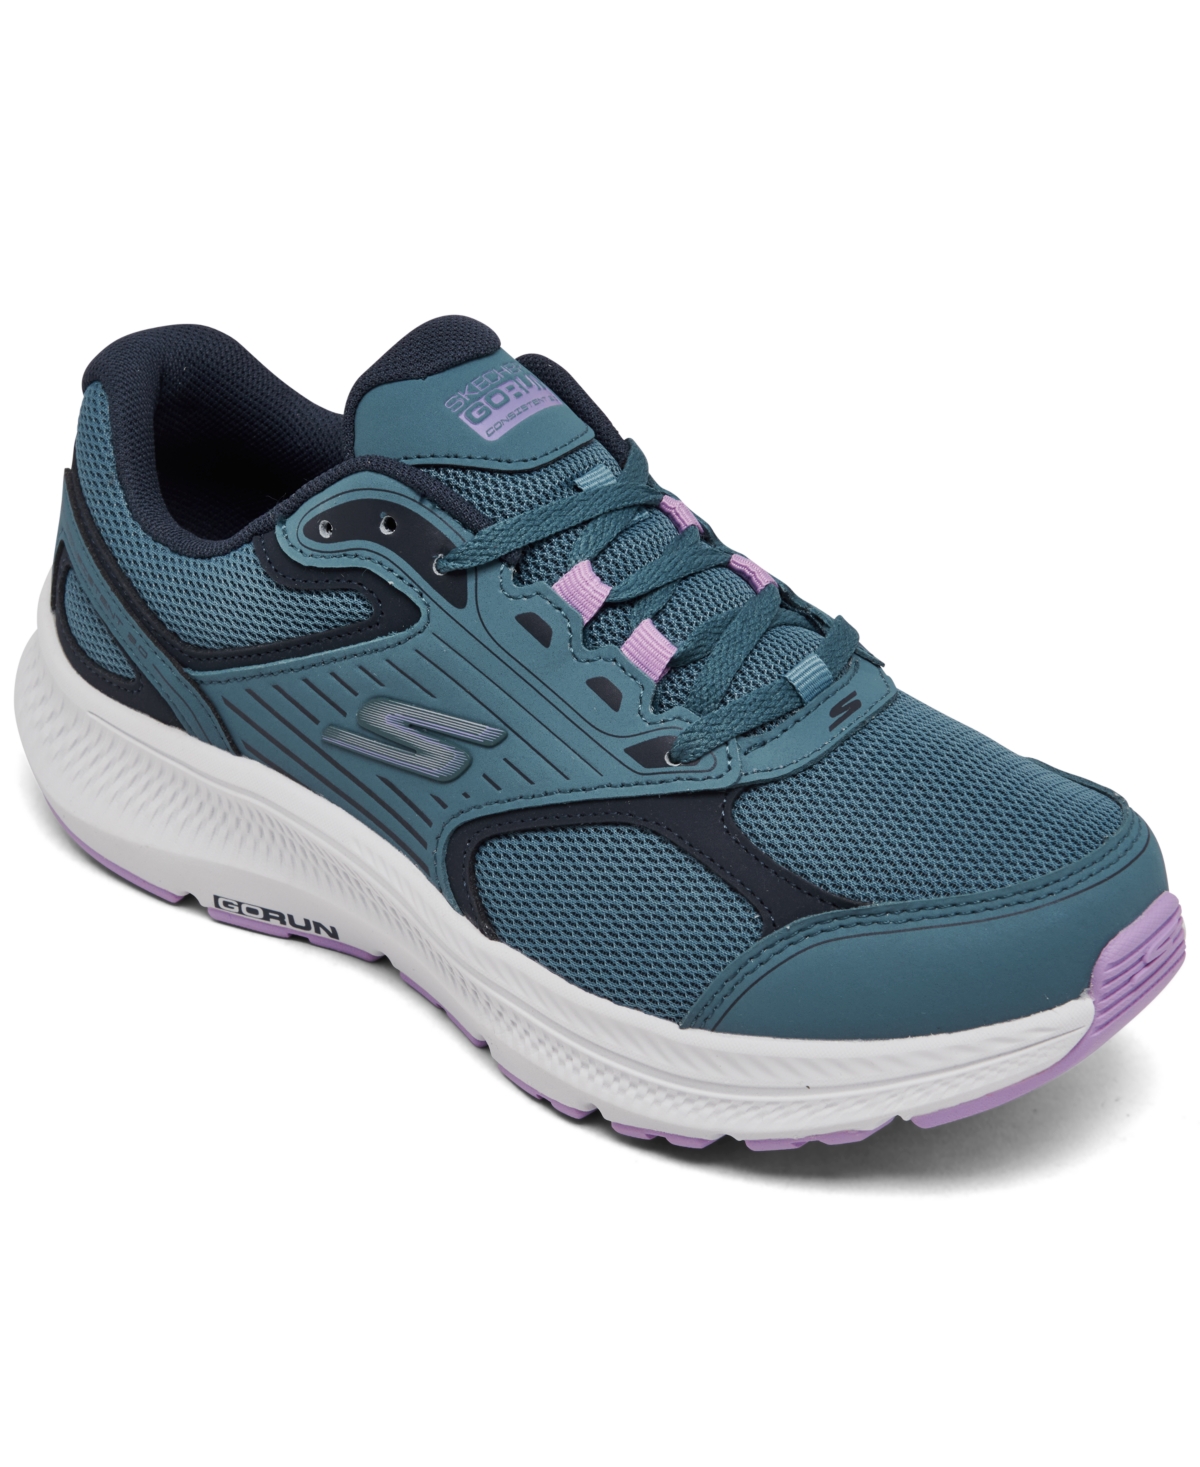 Women's Go Run Consistent 2.0 - Advantage Wide Width Running Sneakers from Finish Line - Blue/Purple